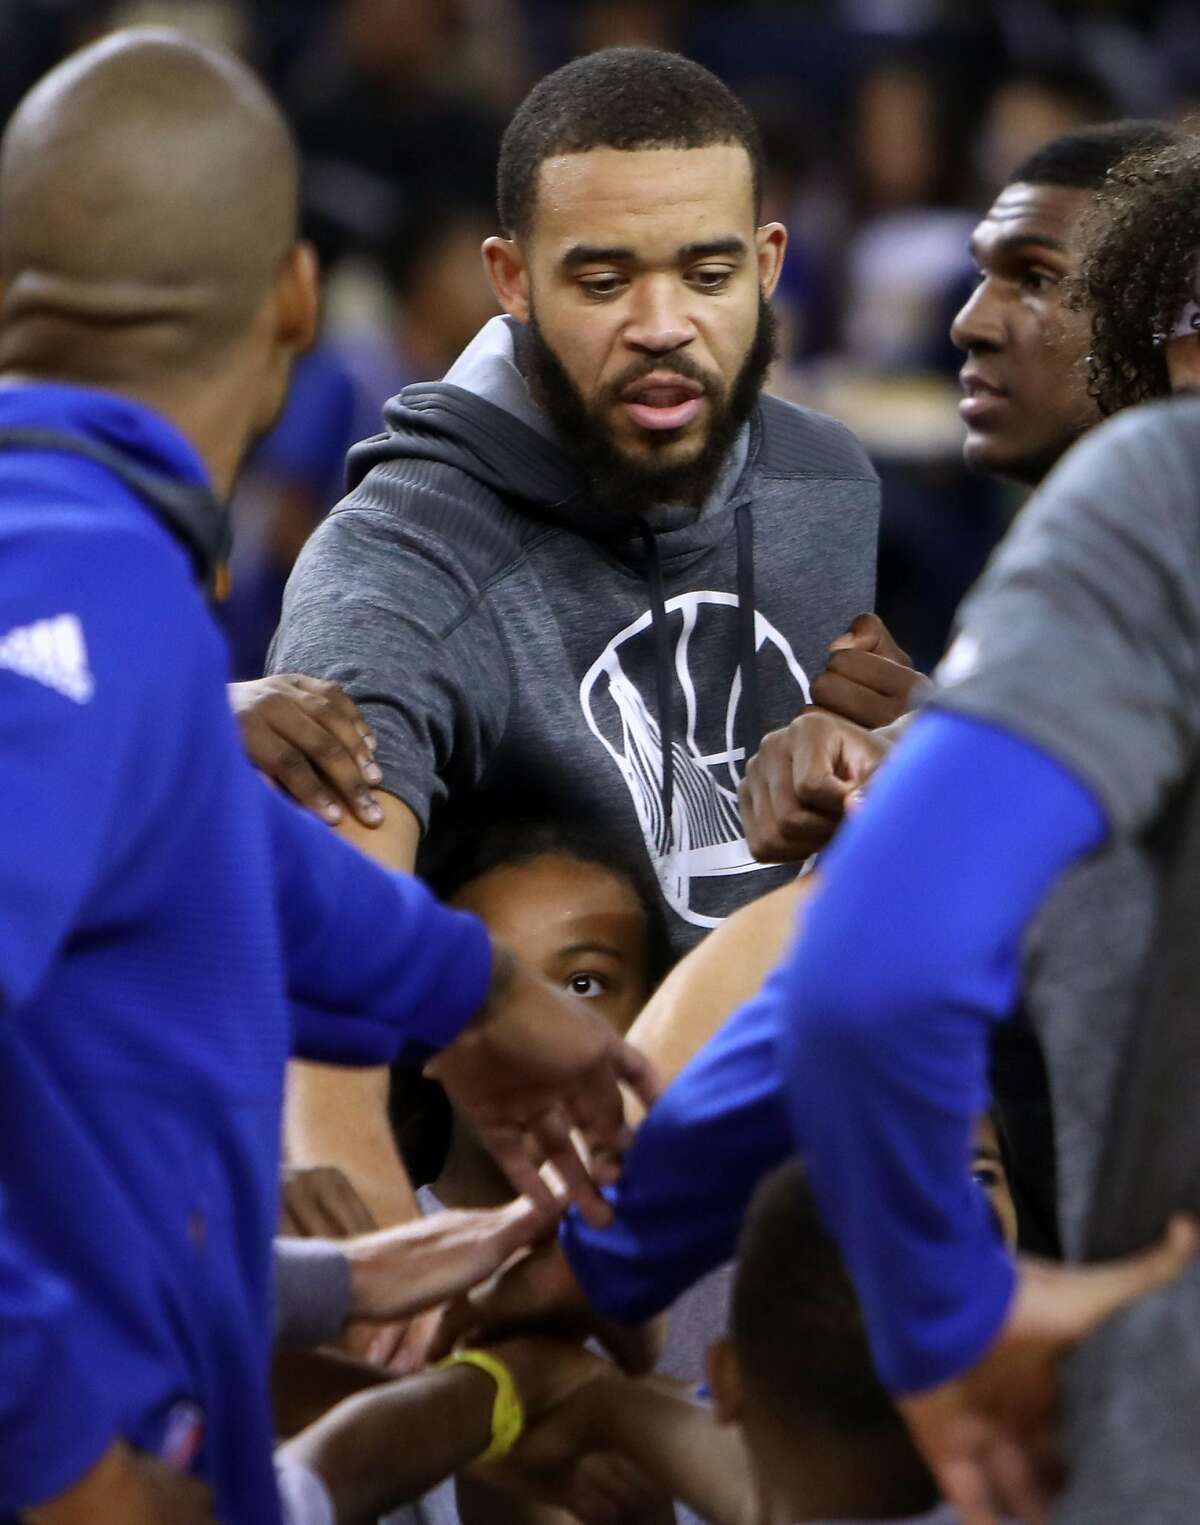 Nobody's fool: Warriors center JaVale McGee (and his mom) savoring